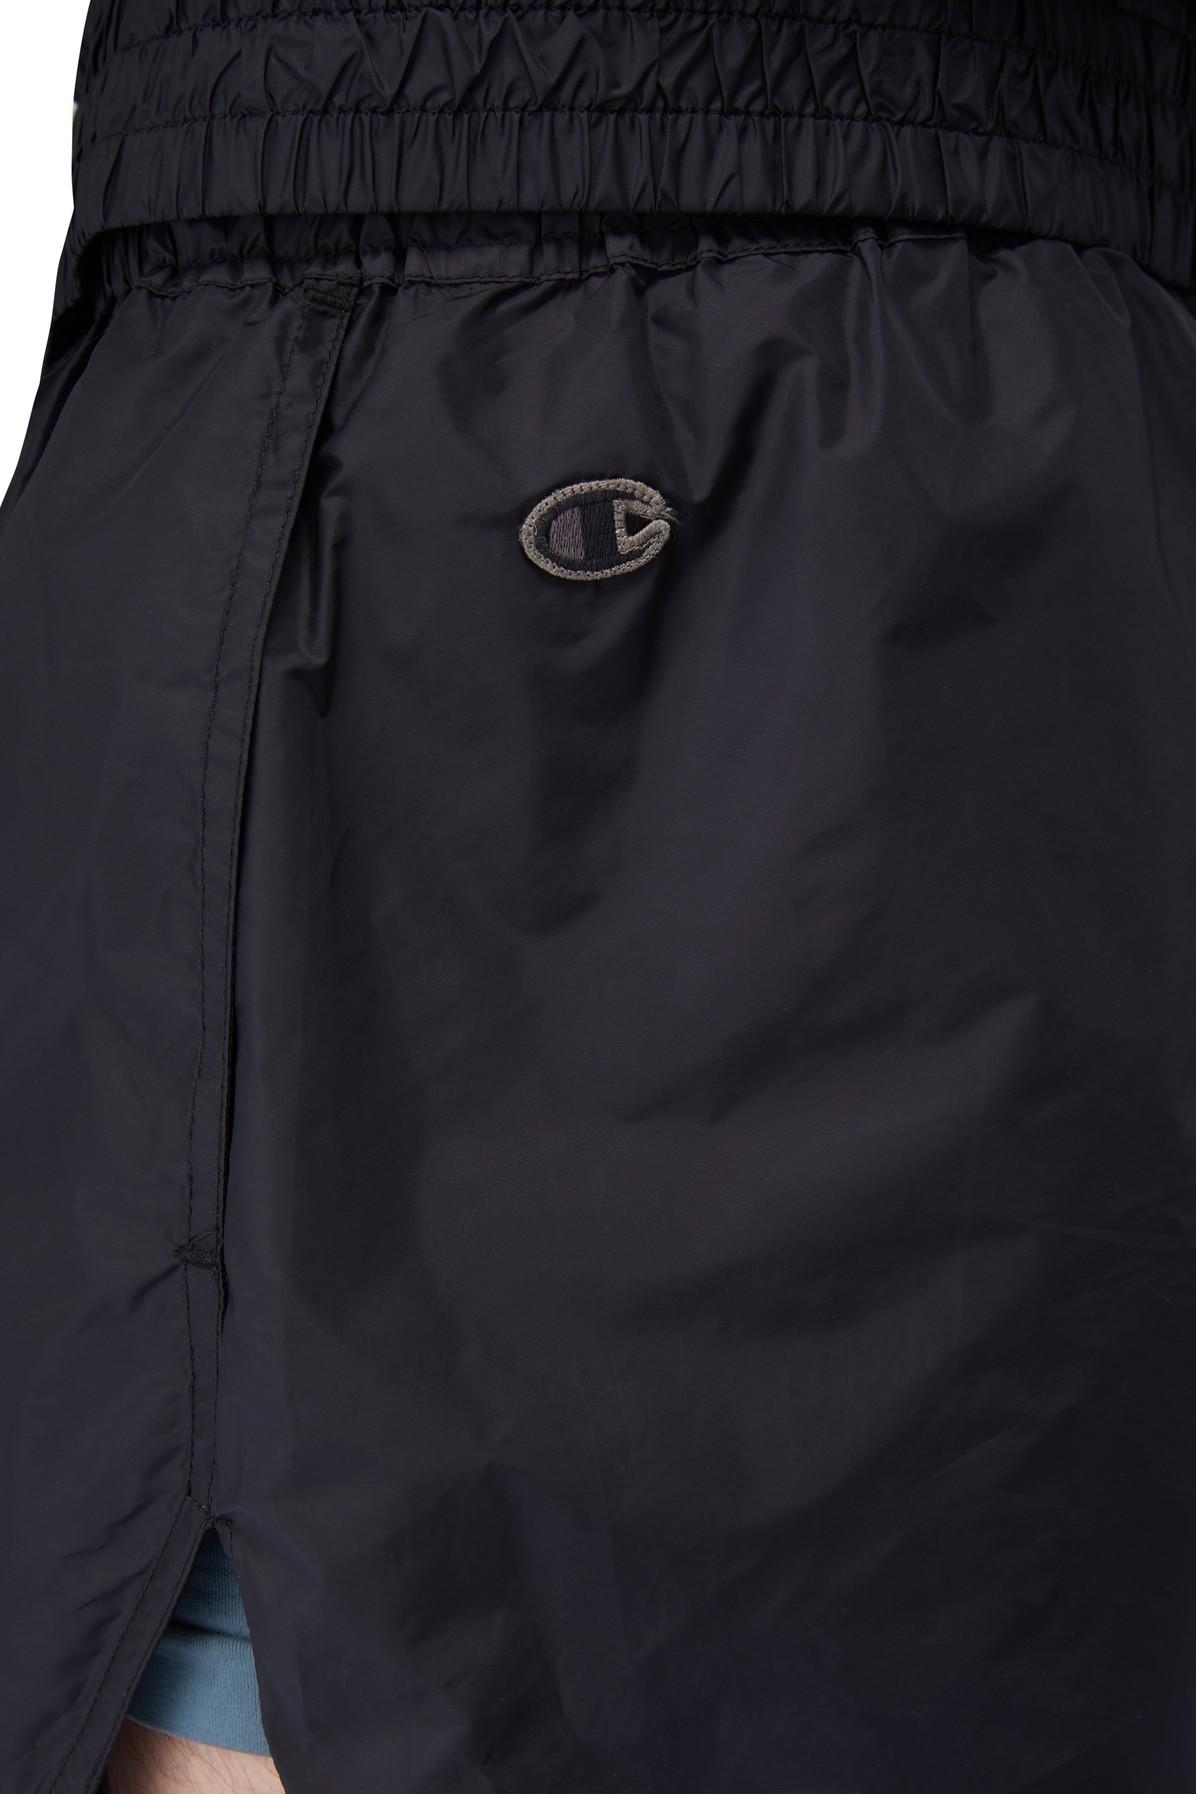 Rick Owens X Champion - Dolphin Boxers Shorts in Black for Men | Lyst